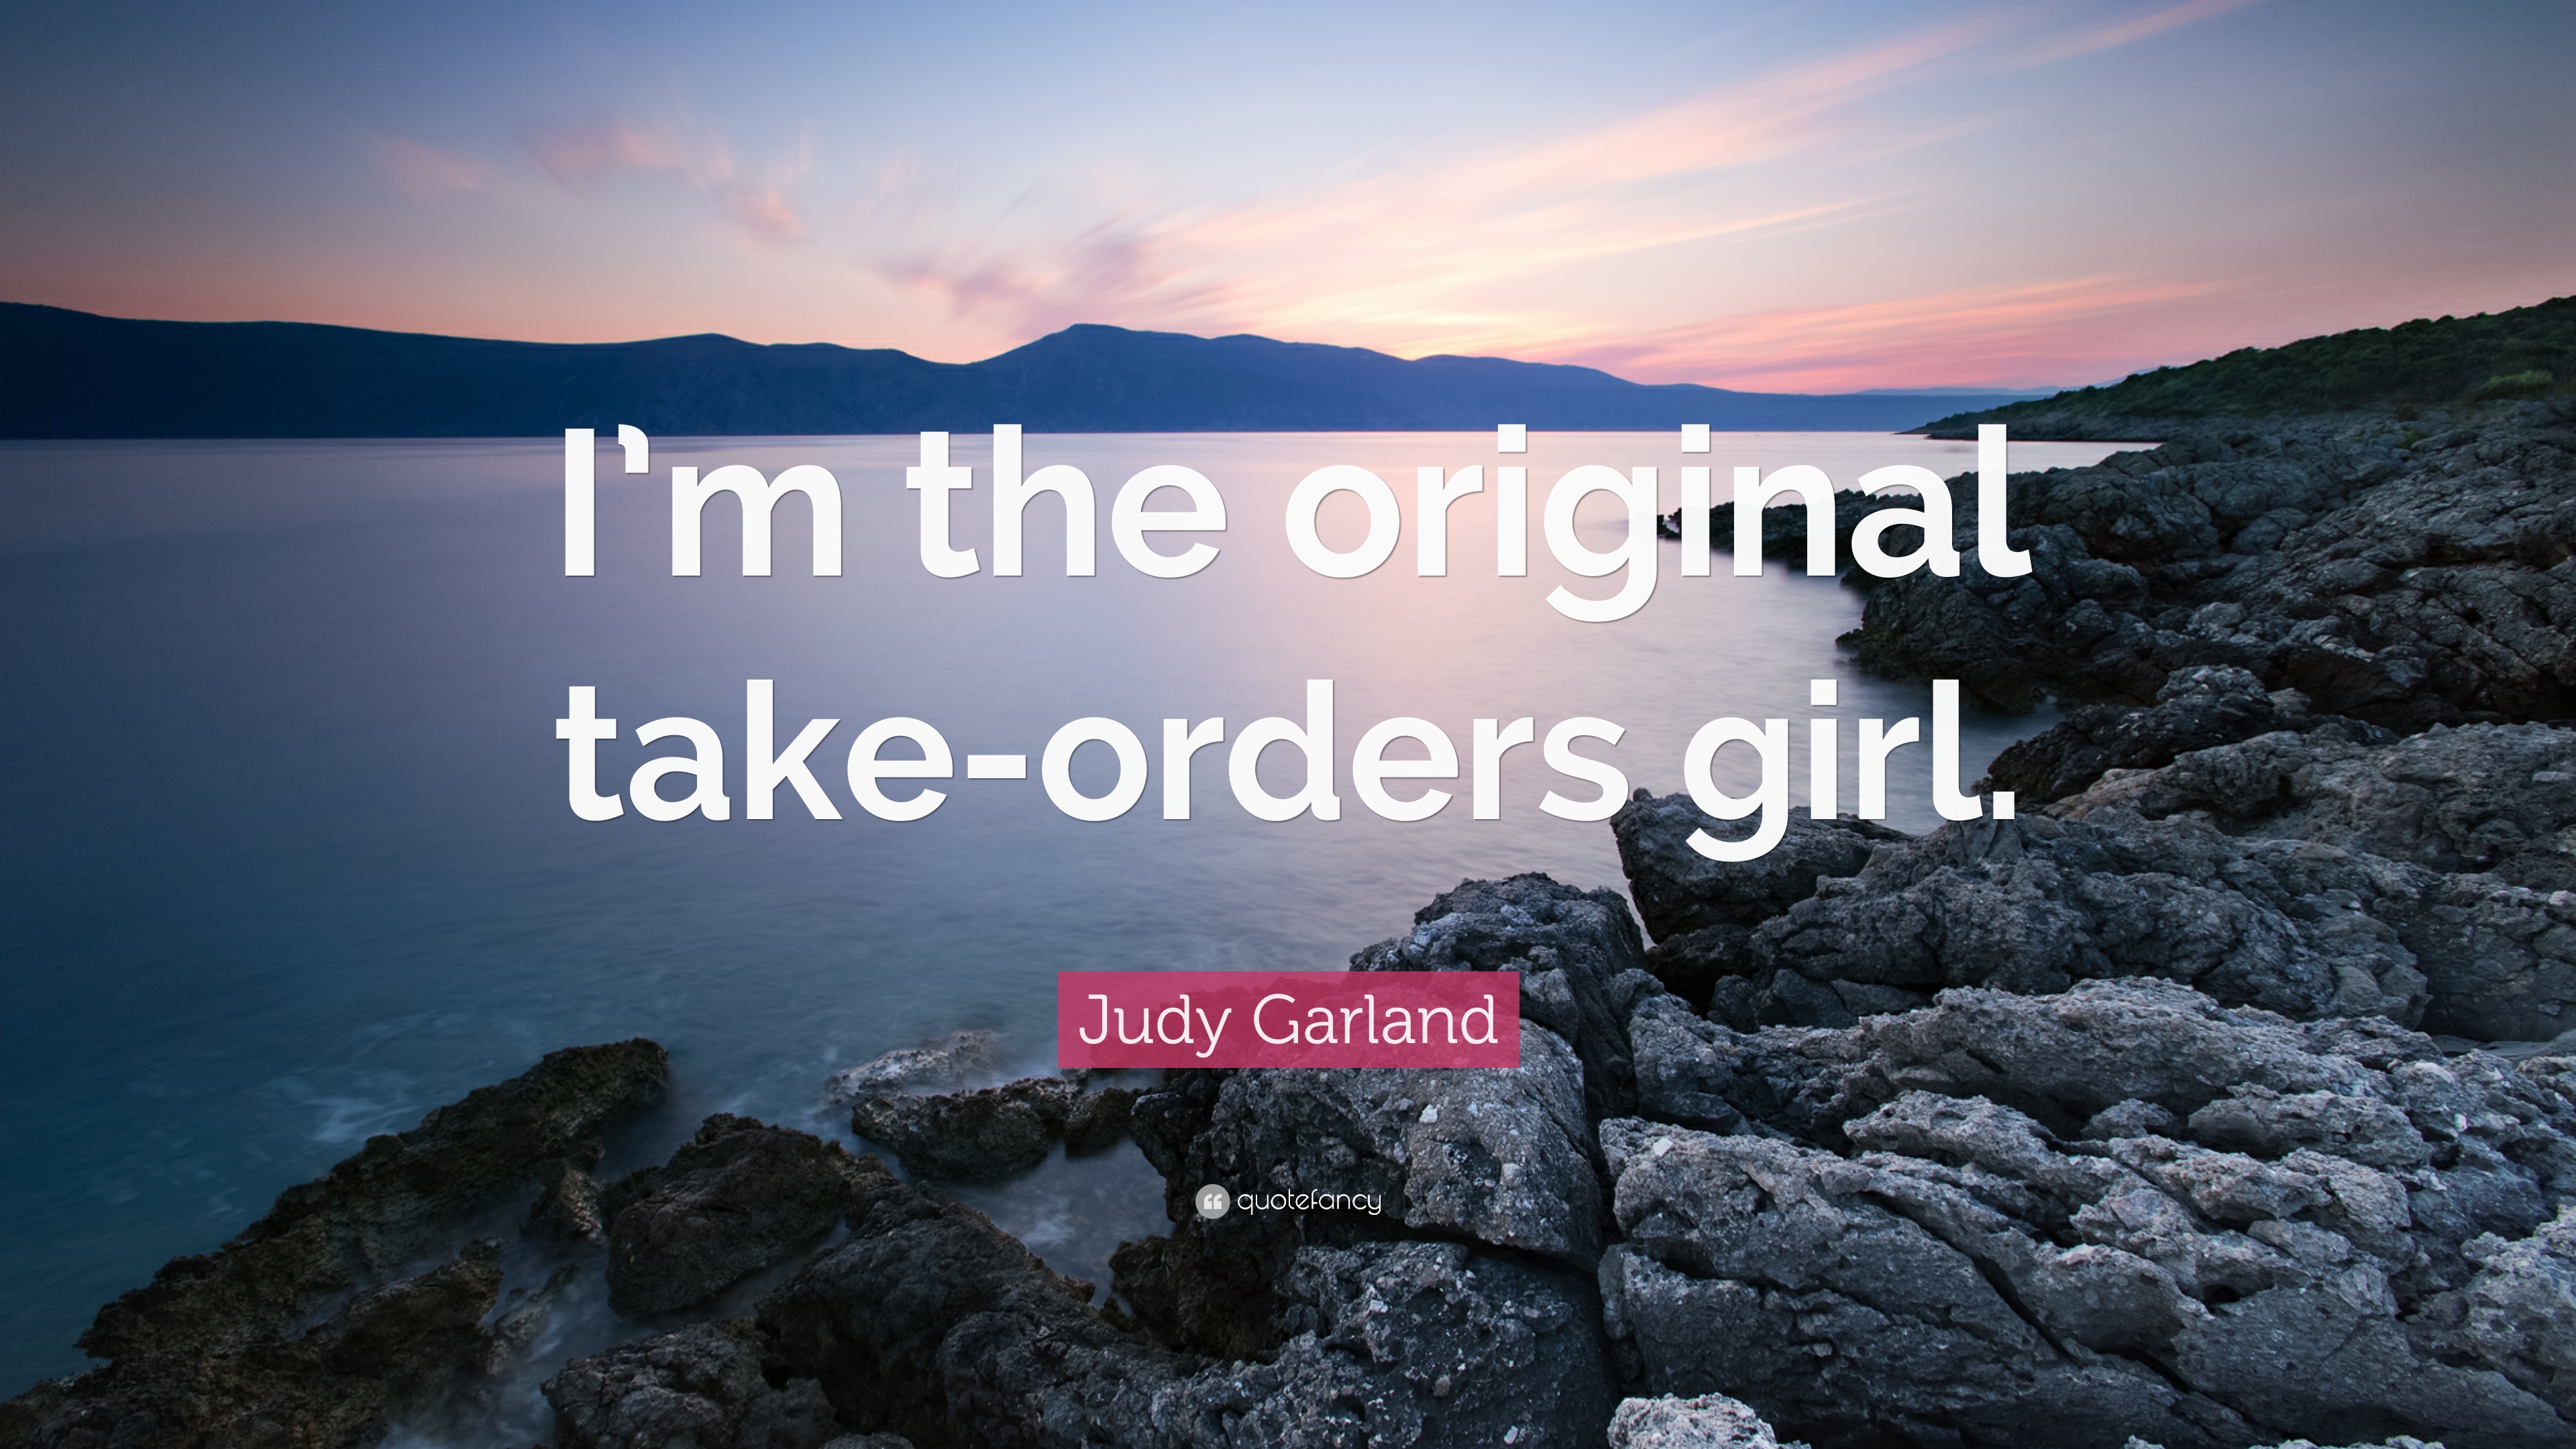 Judy Garland Quote: “I'm The Original Take Orders Girl.” 10